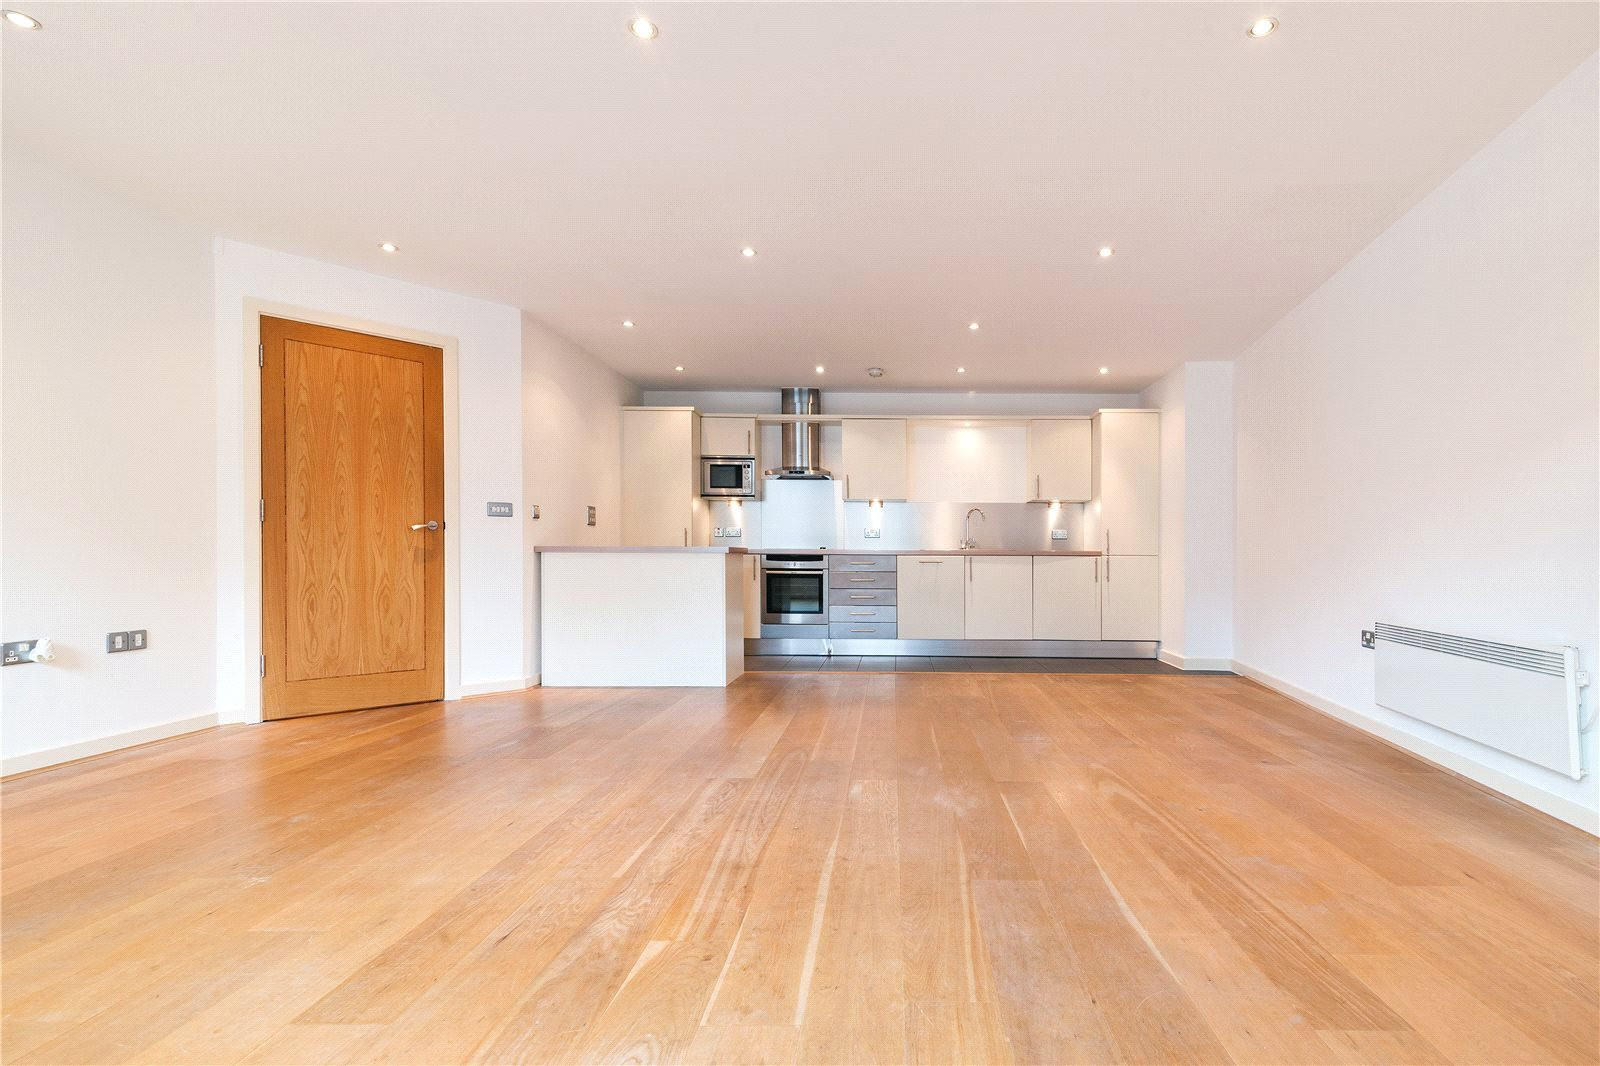 22 Stylish Hardwood Flooring Victoria Park 2024 free download hardwood flooring victoria park of 1 bedroom property for sale in dickinson court 15 brewhouse yard with 1 bedroom property for sale in dickinson court 15 brewhouse yard london ec1v a699000